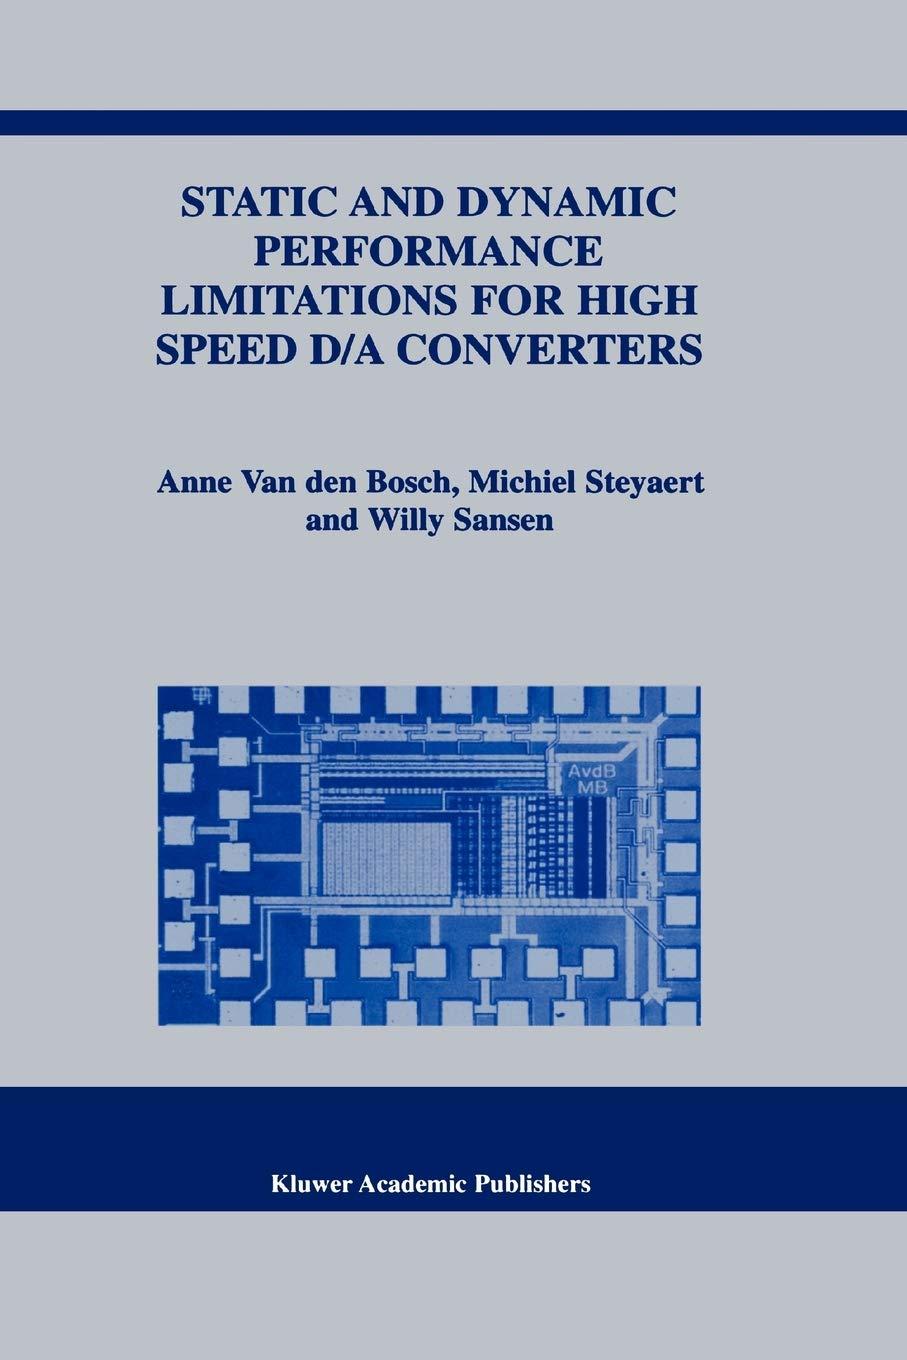 static and dynamic performance limitations for high speed d/a converters 2004 edition anne van den bosch,